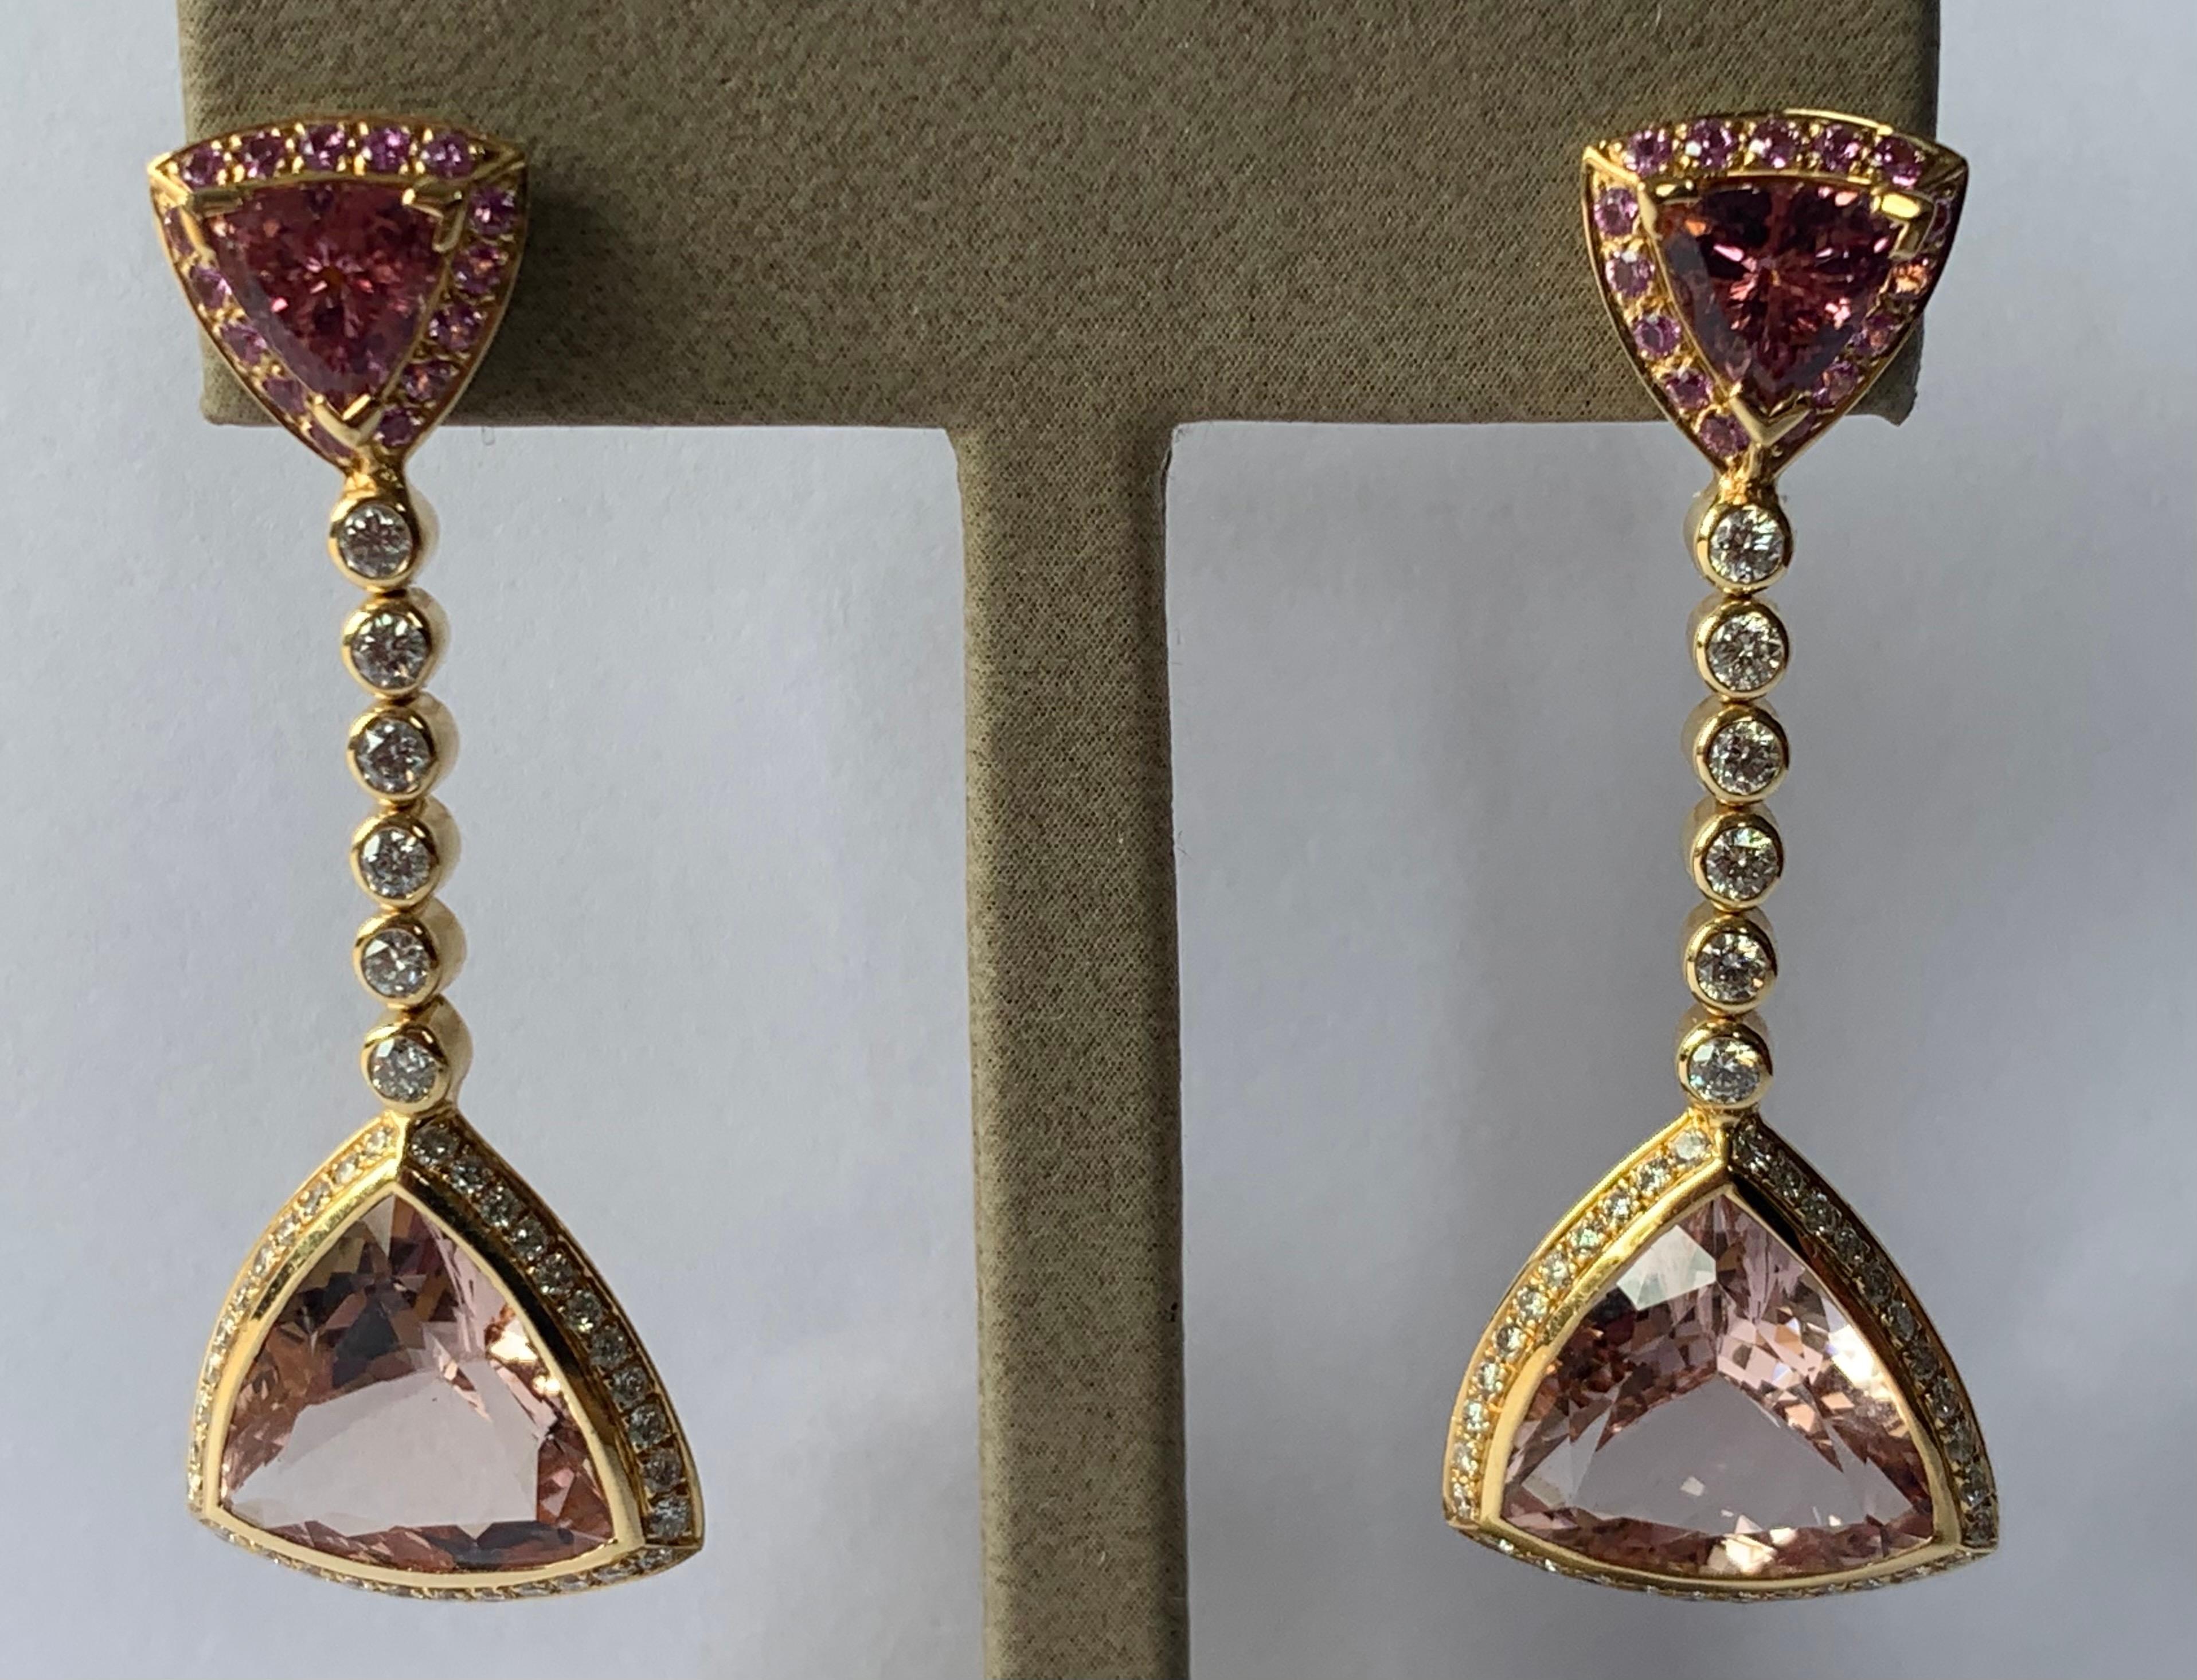 A pair of elegant 18 K yellow Gold earrings signed by Gübelin Lucerne set with 2 triangle shaped pink Tourmalines weighing 1.97 ct, 2 triangle shaped Morganites (pink variety of Beryl) weighing 11.84 ct and Diamonds weighing 1.21 ct, G color, vs